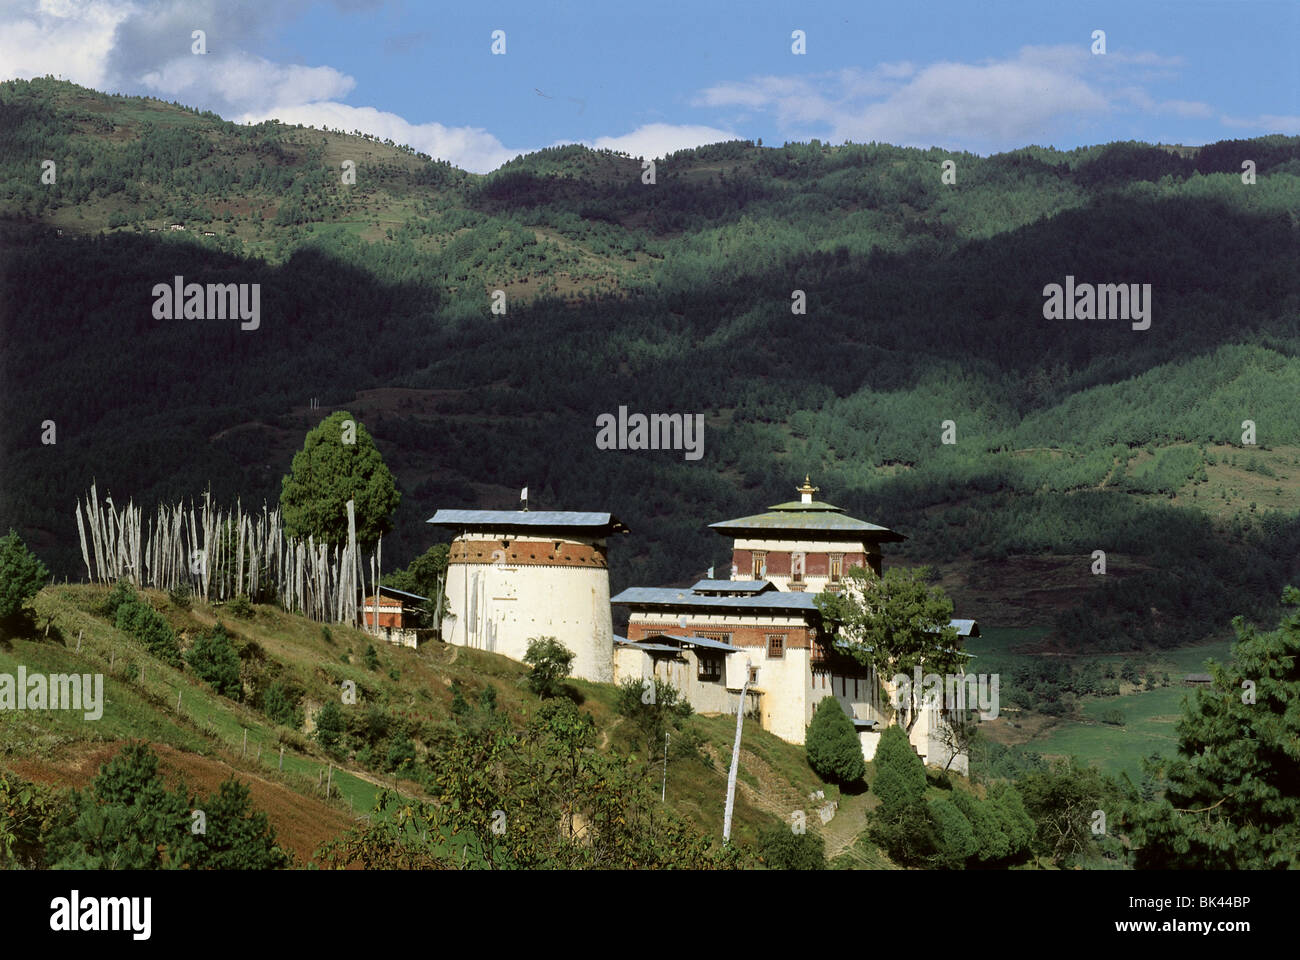 A Buddhist temple and monastery in the Kingdom of Bhutan Stock Photo